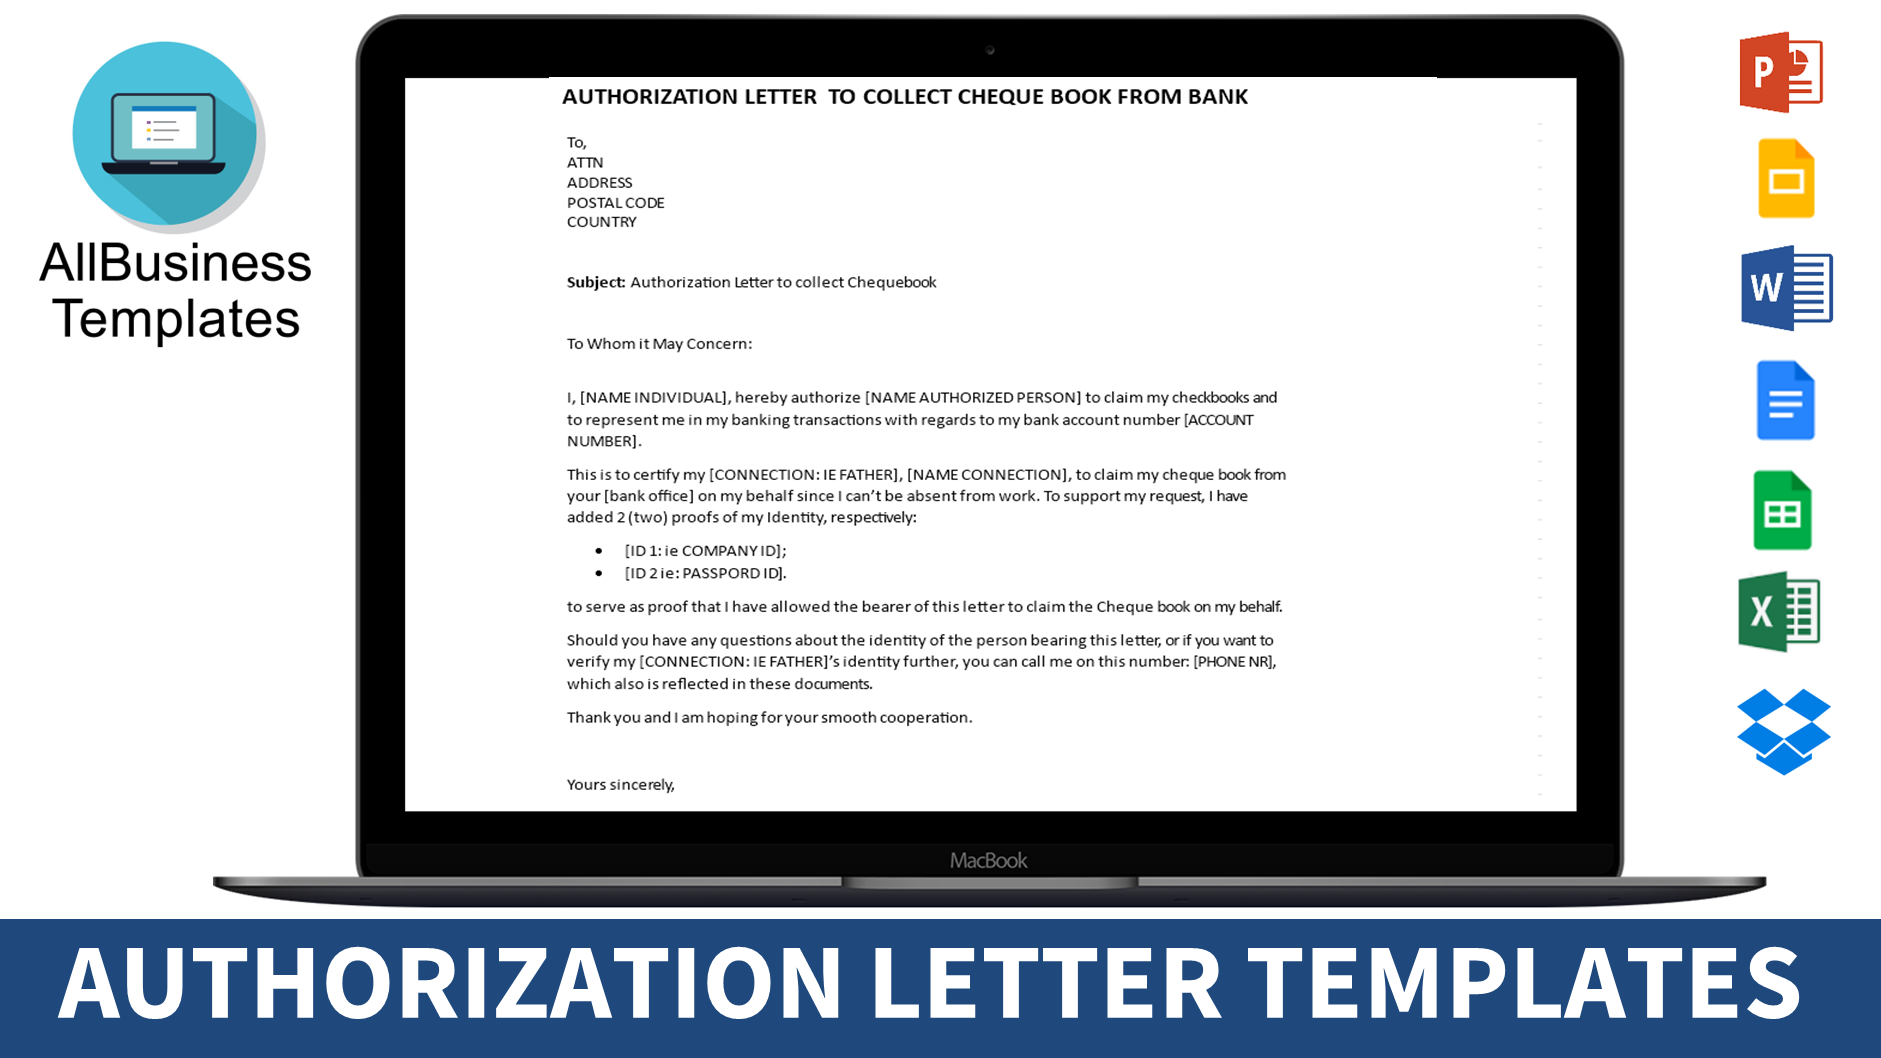 authorization letter to bank to collect cheque book plantilla imagen principal